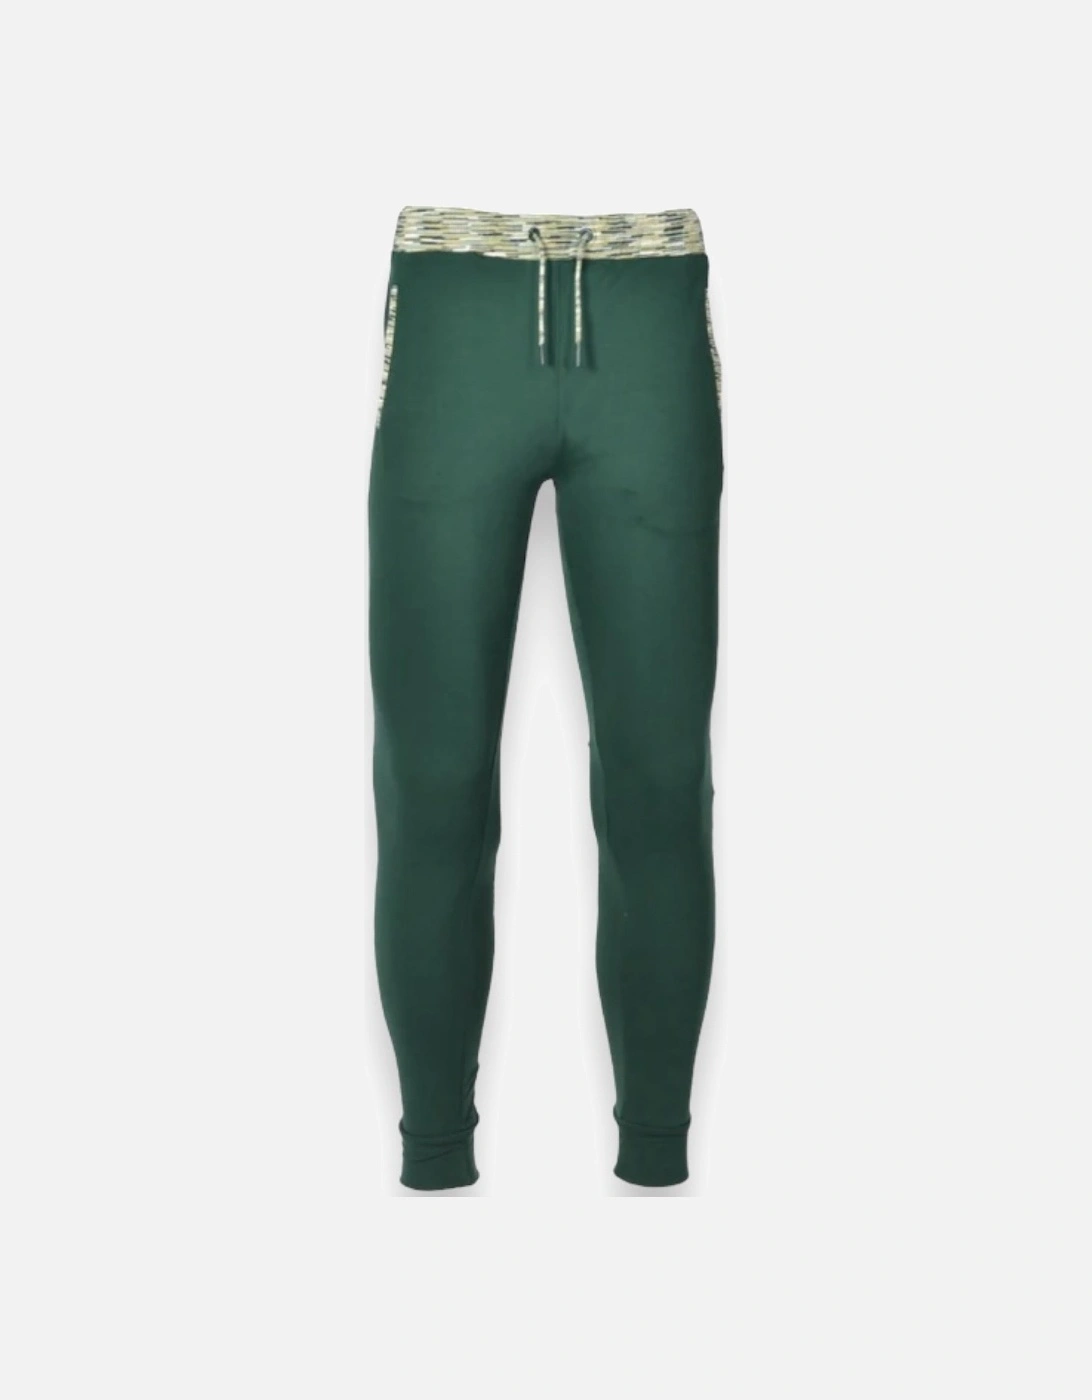 Green Space Dye Joggers, 8 of 7